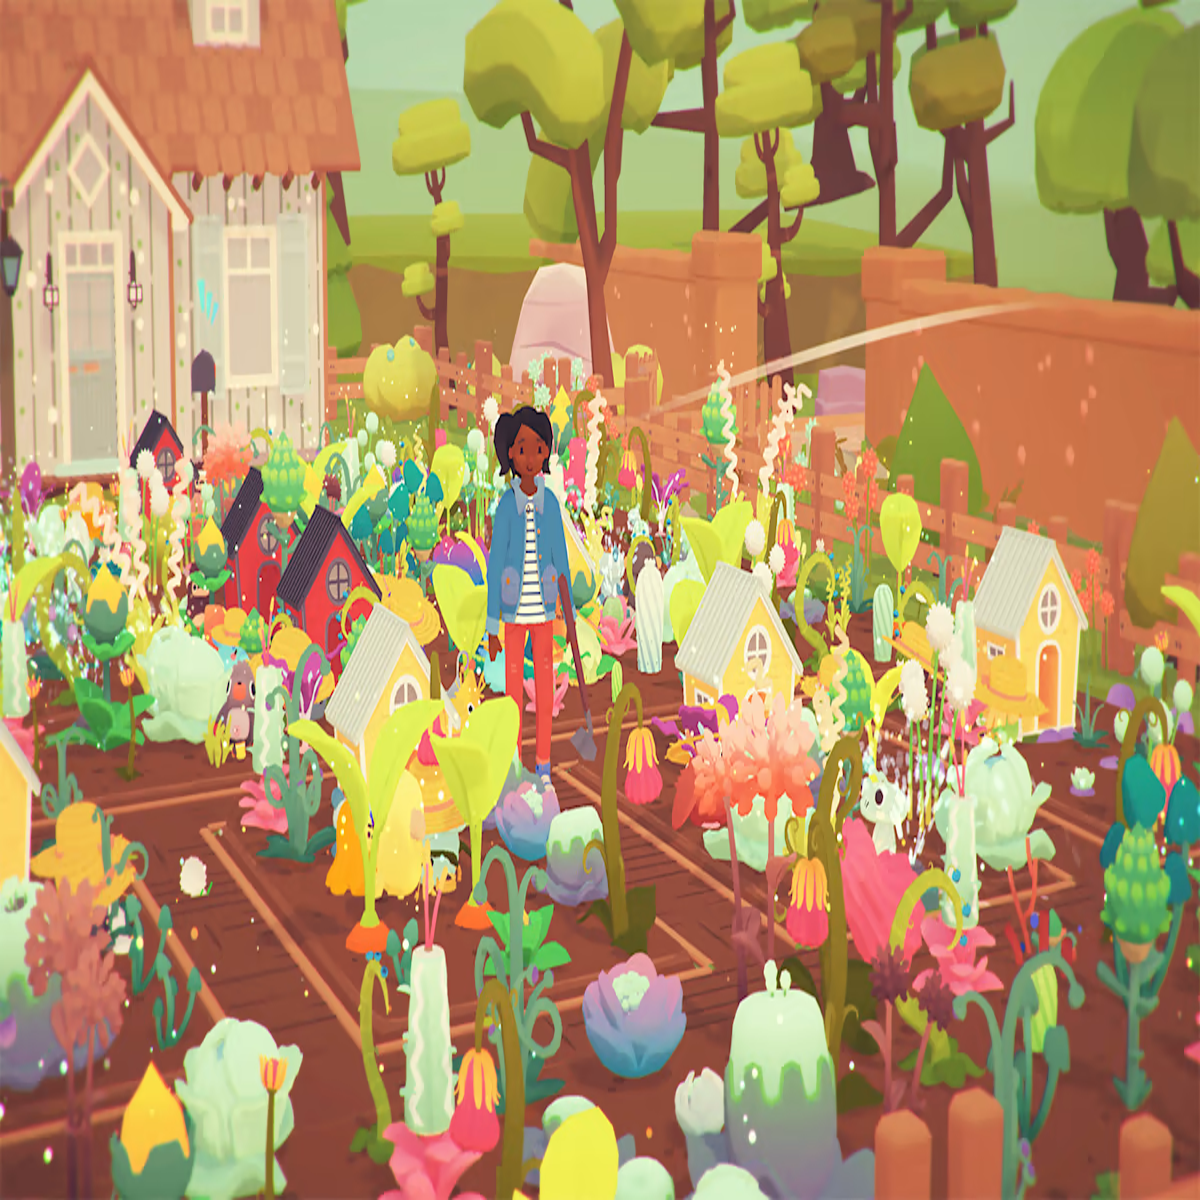 Ooblets will full summer release in this